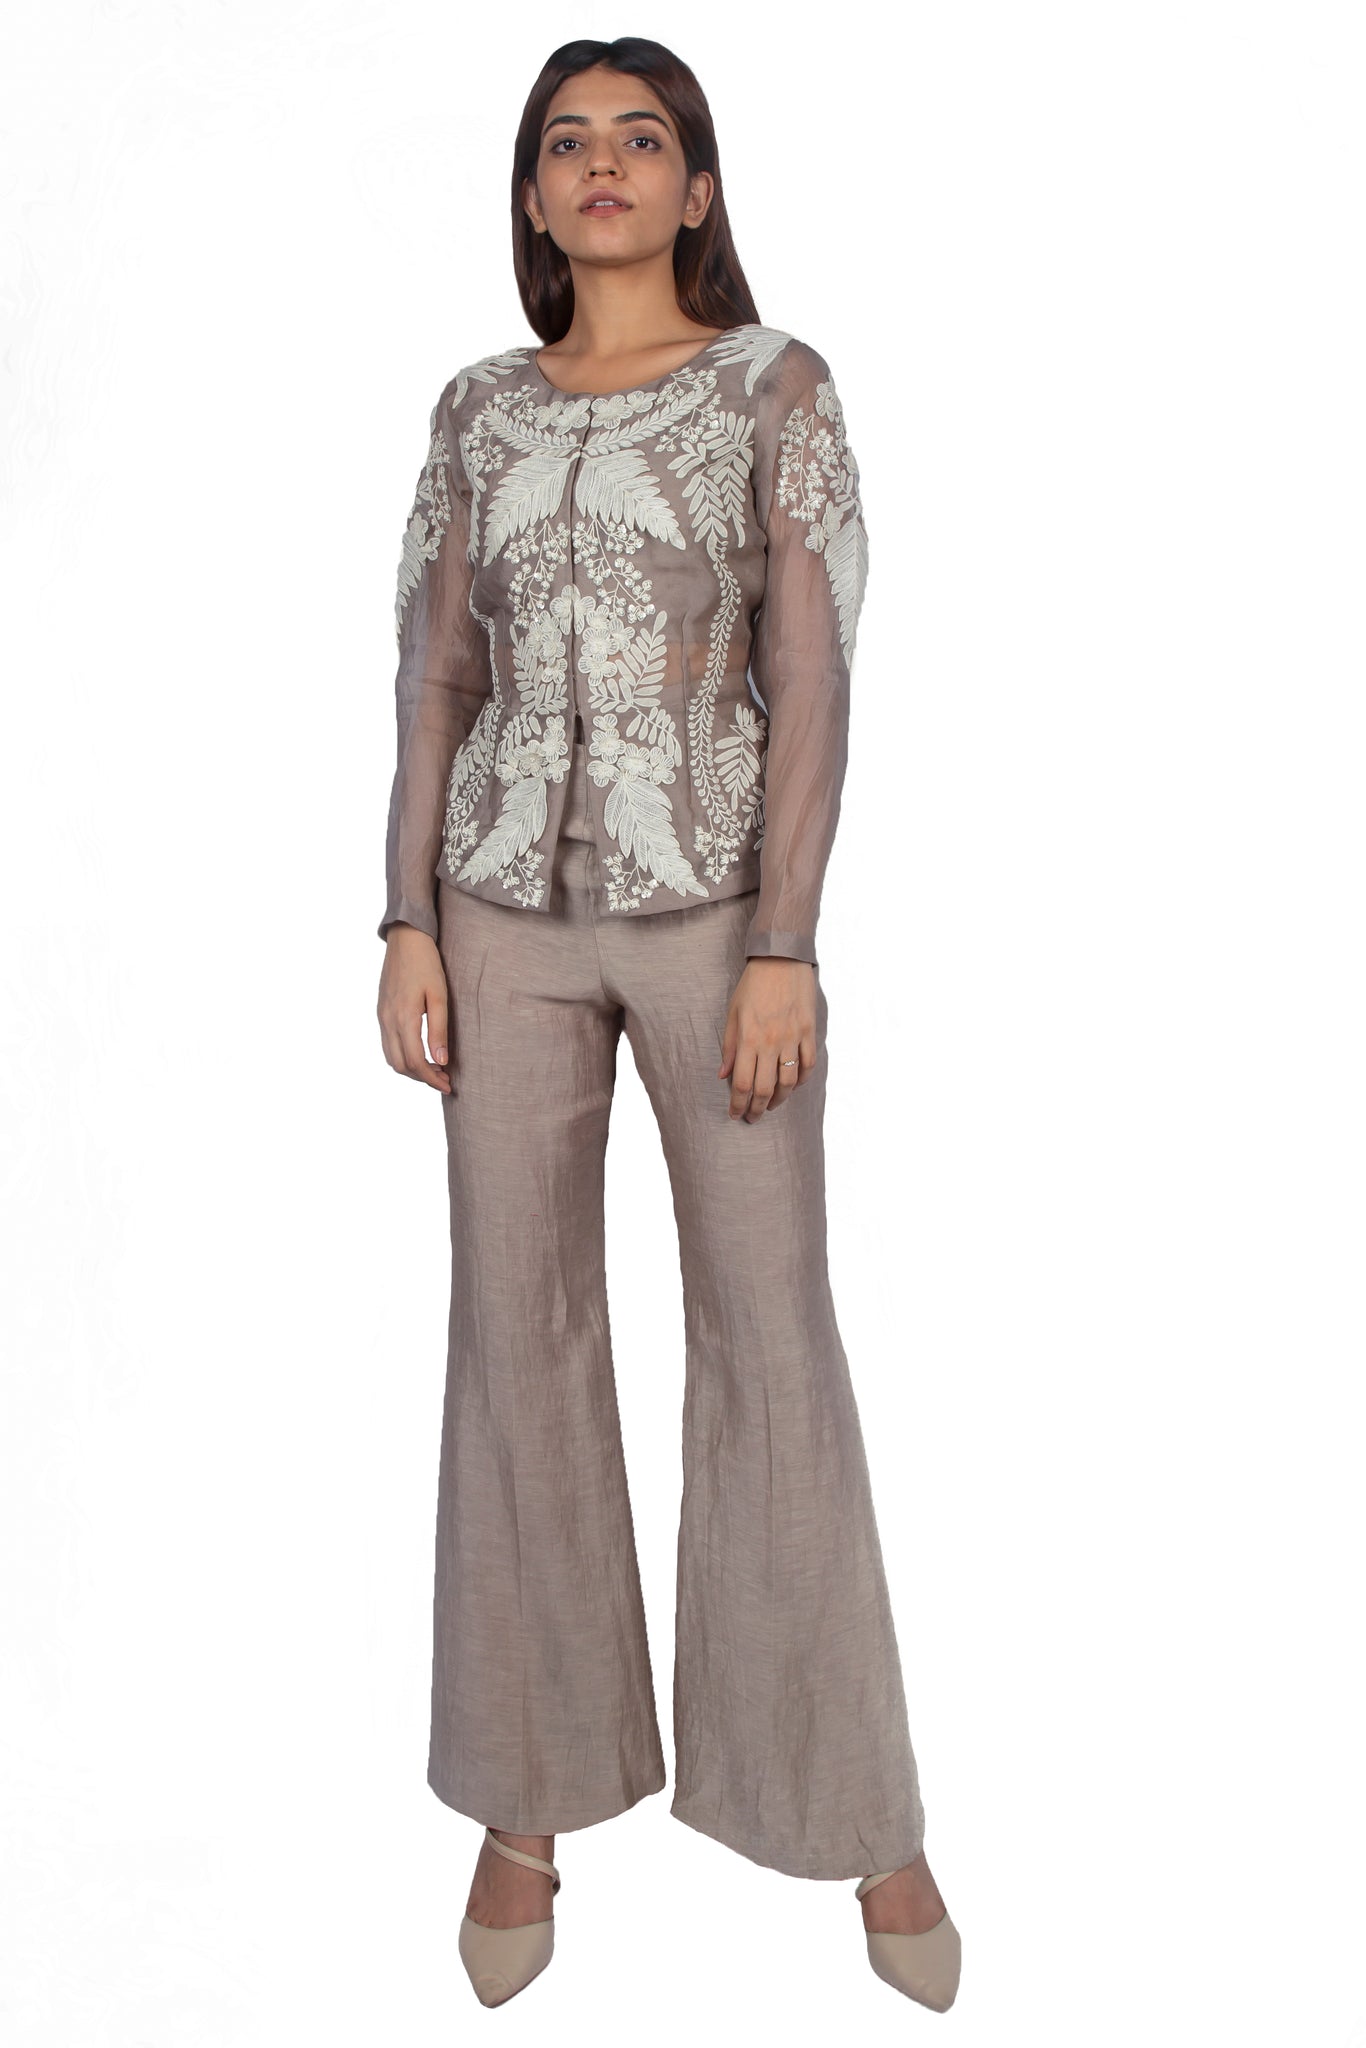 THE ASH TOP AND PANT SUIT